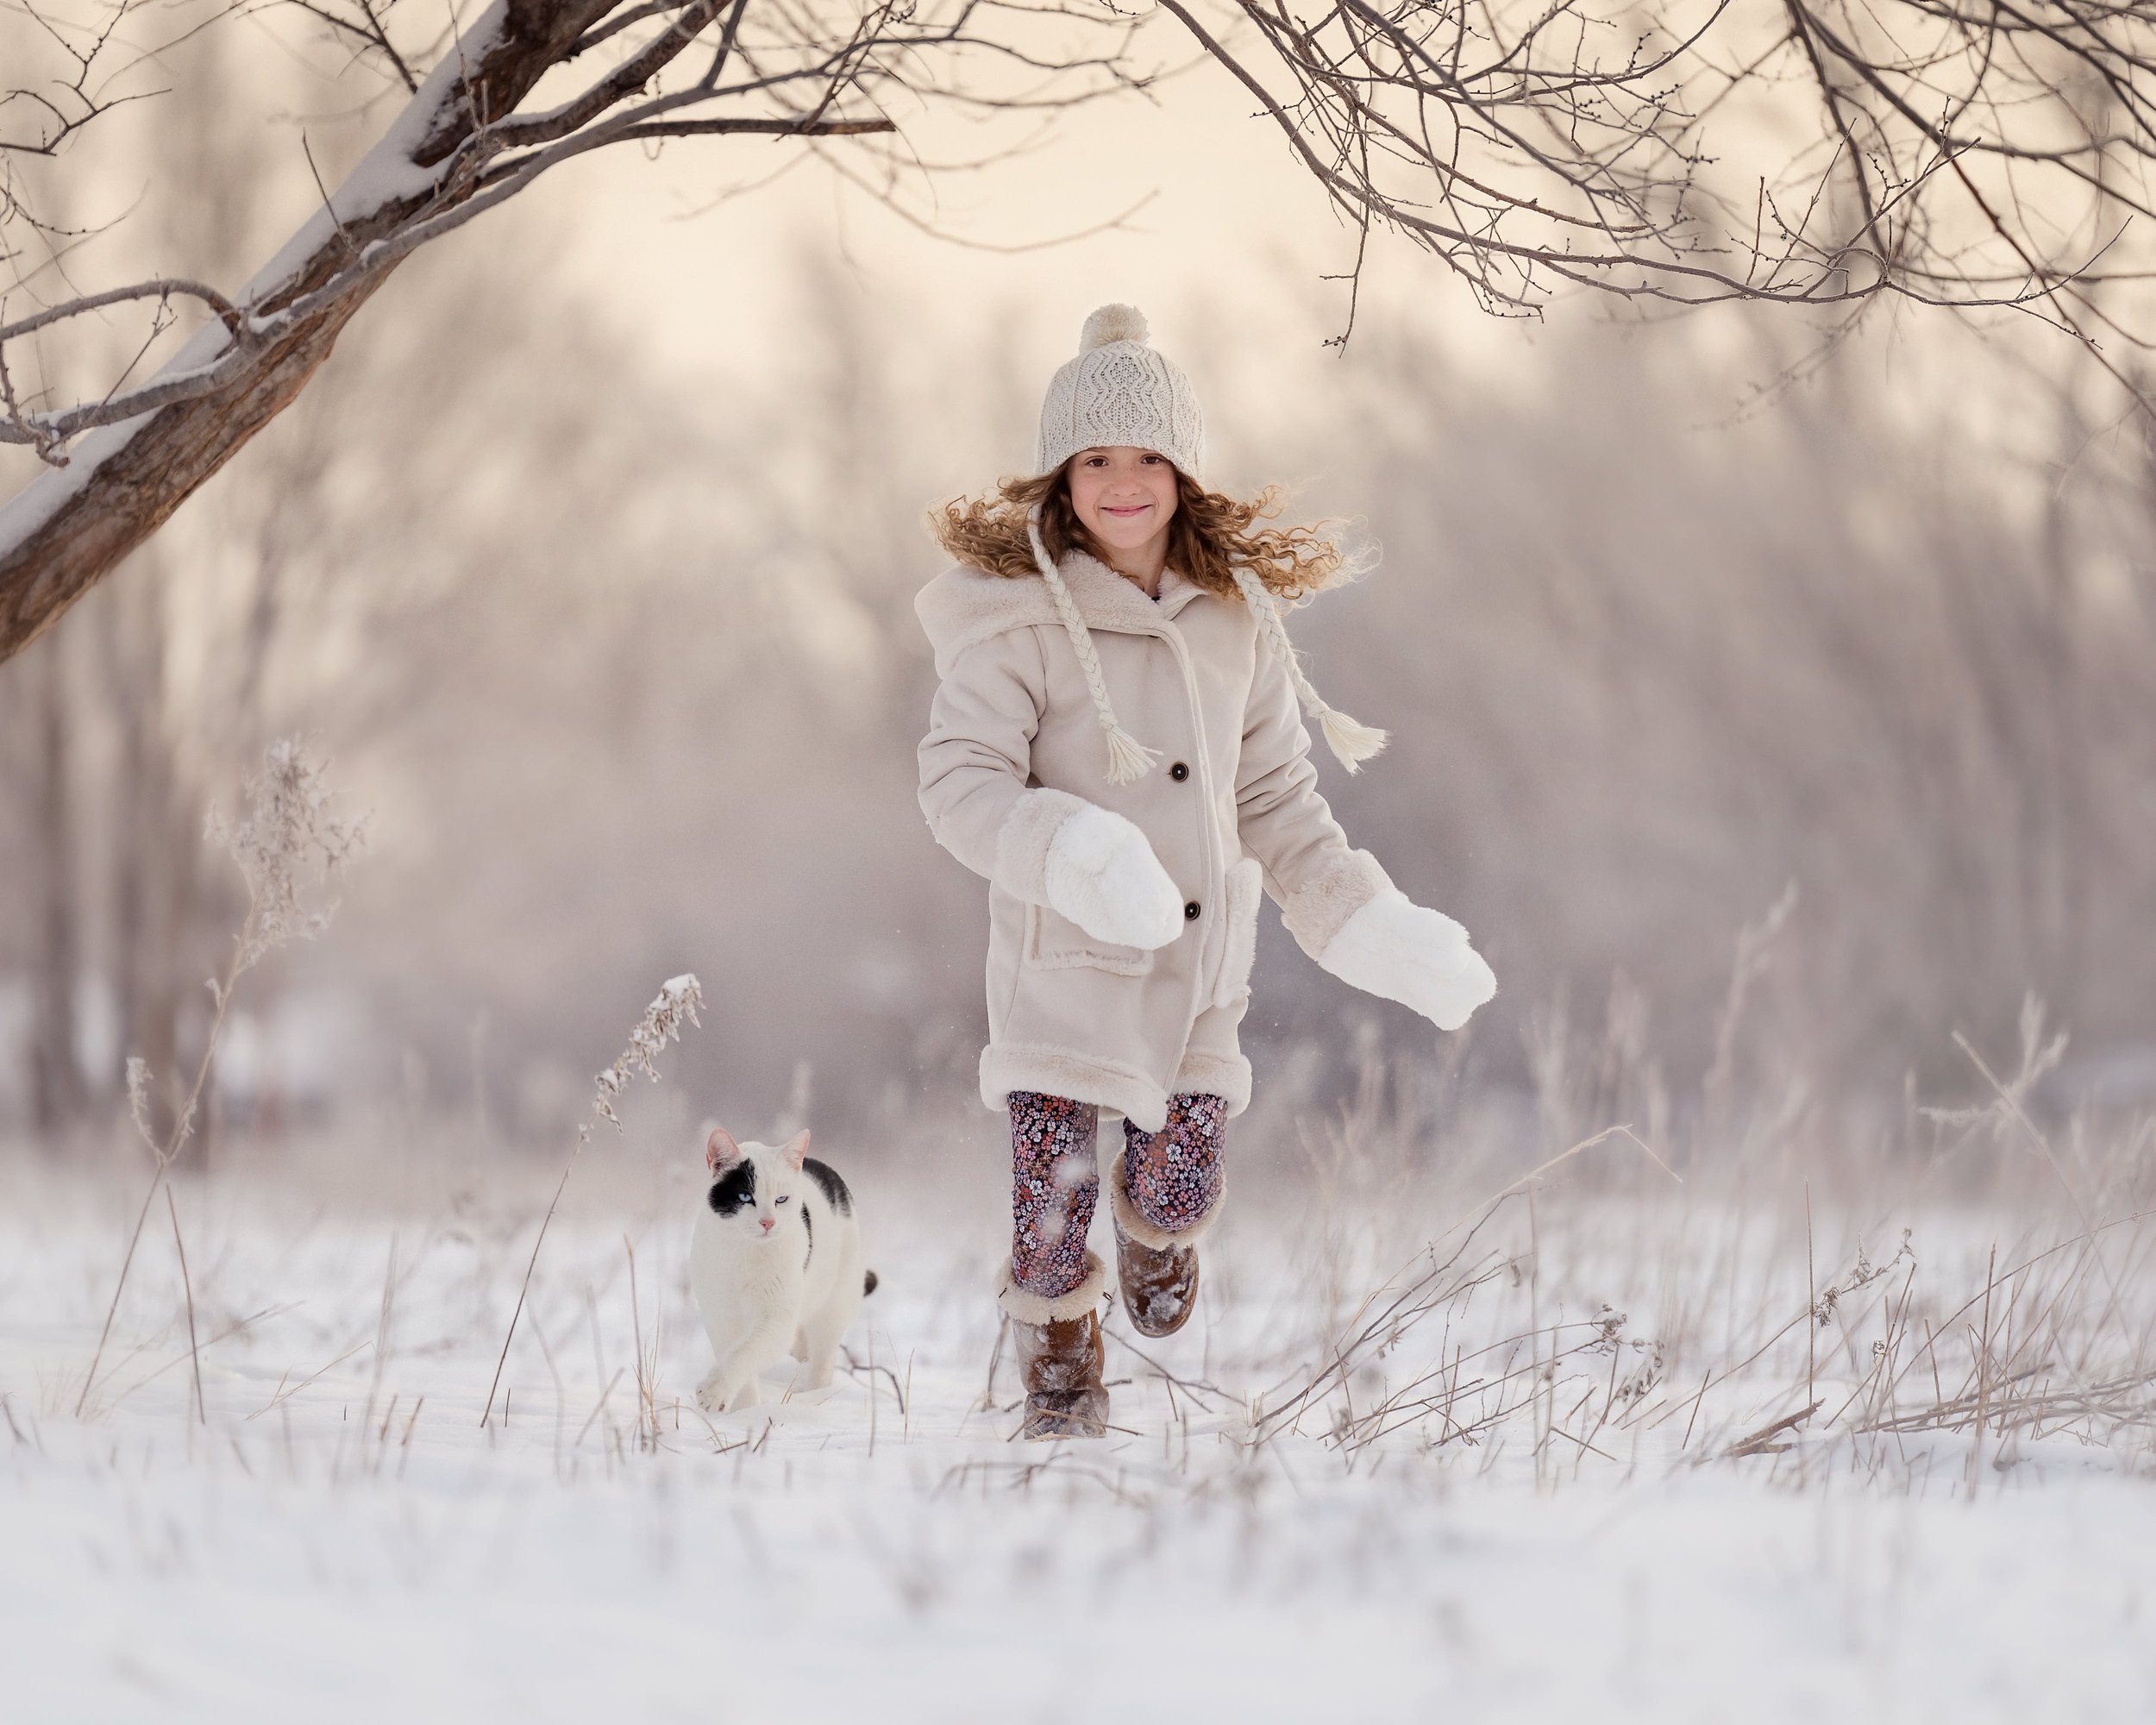 Angie Perisse - Portfolio - A trip to the snow - Photography Session for Kids, Pets, Horses, Family and Studio in Vernon, Texas, USA.